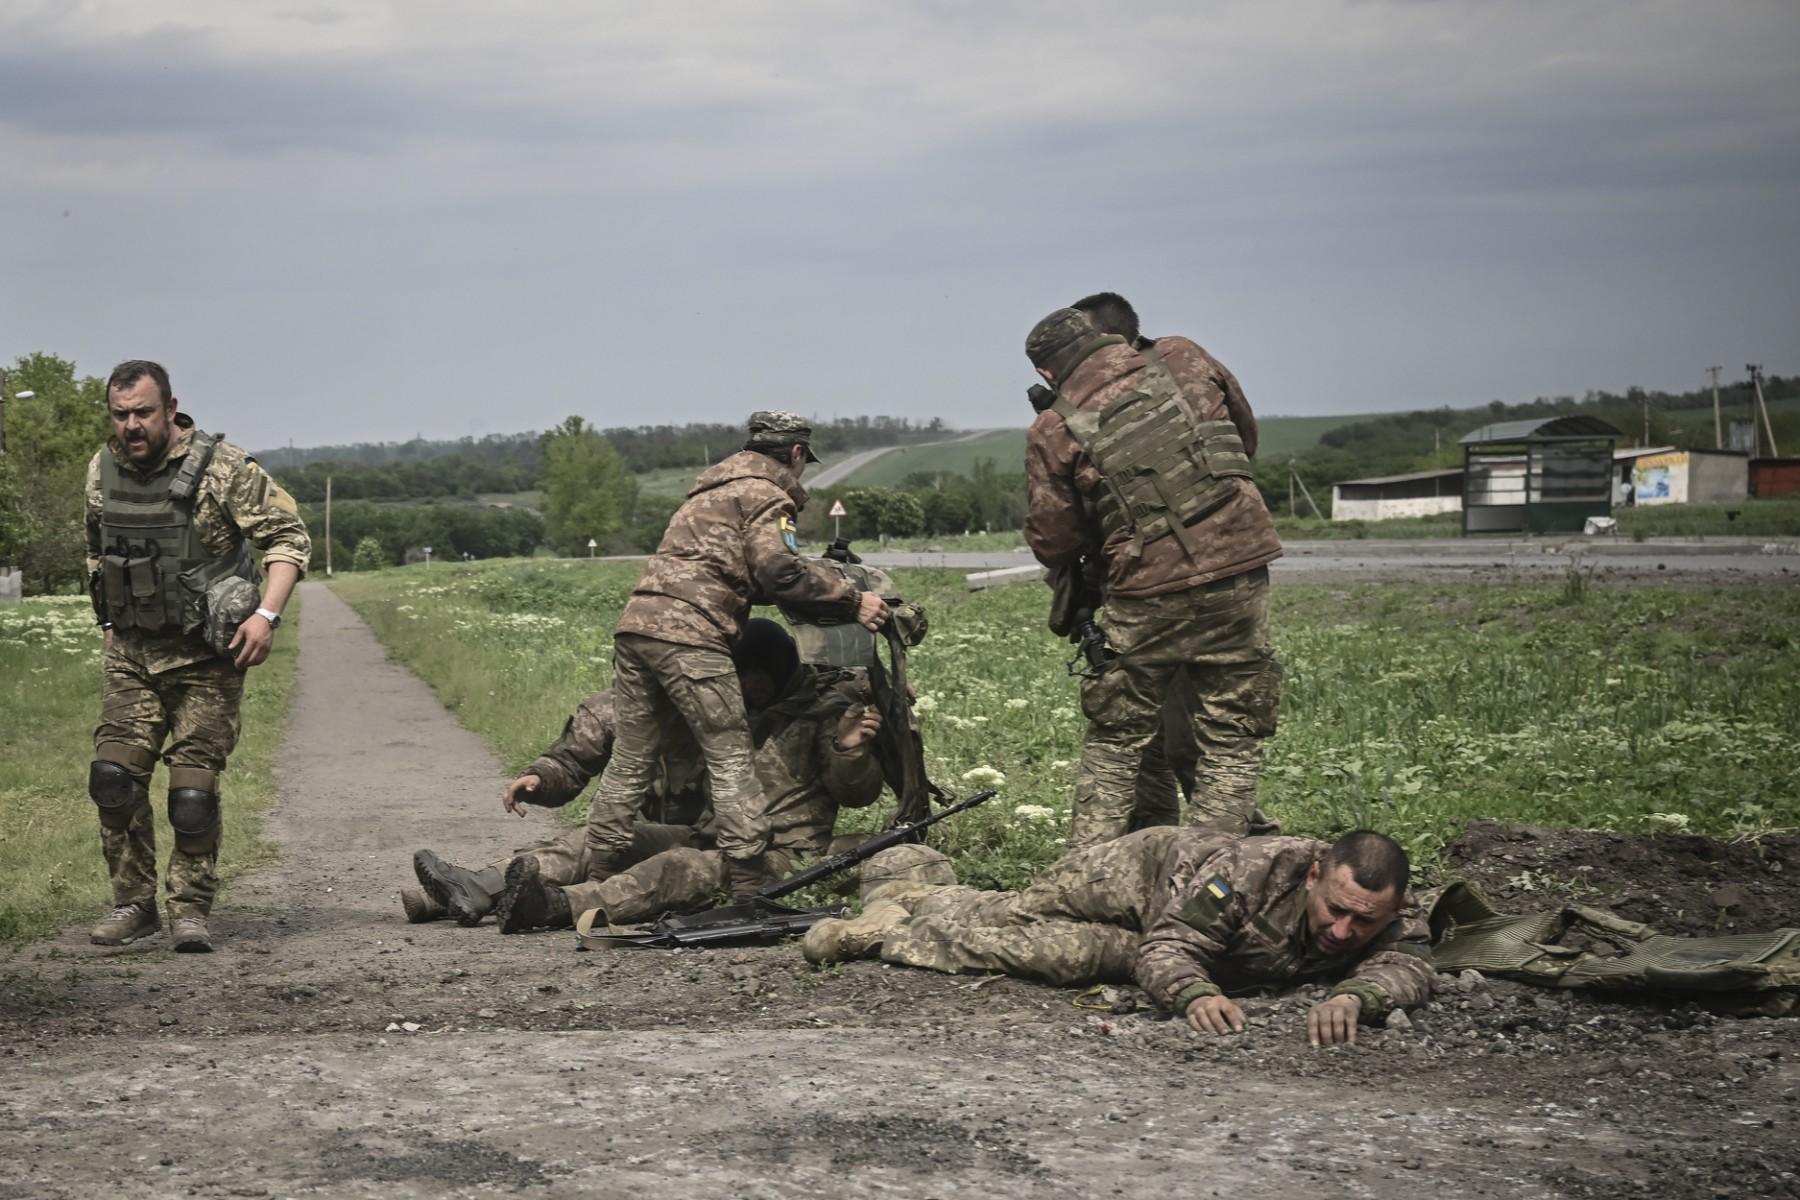 Ukrainian servicemen assist their comrades not far from the frontline in the eastern Ukrainian region of Donbas, on May 21. Photo: AFP